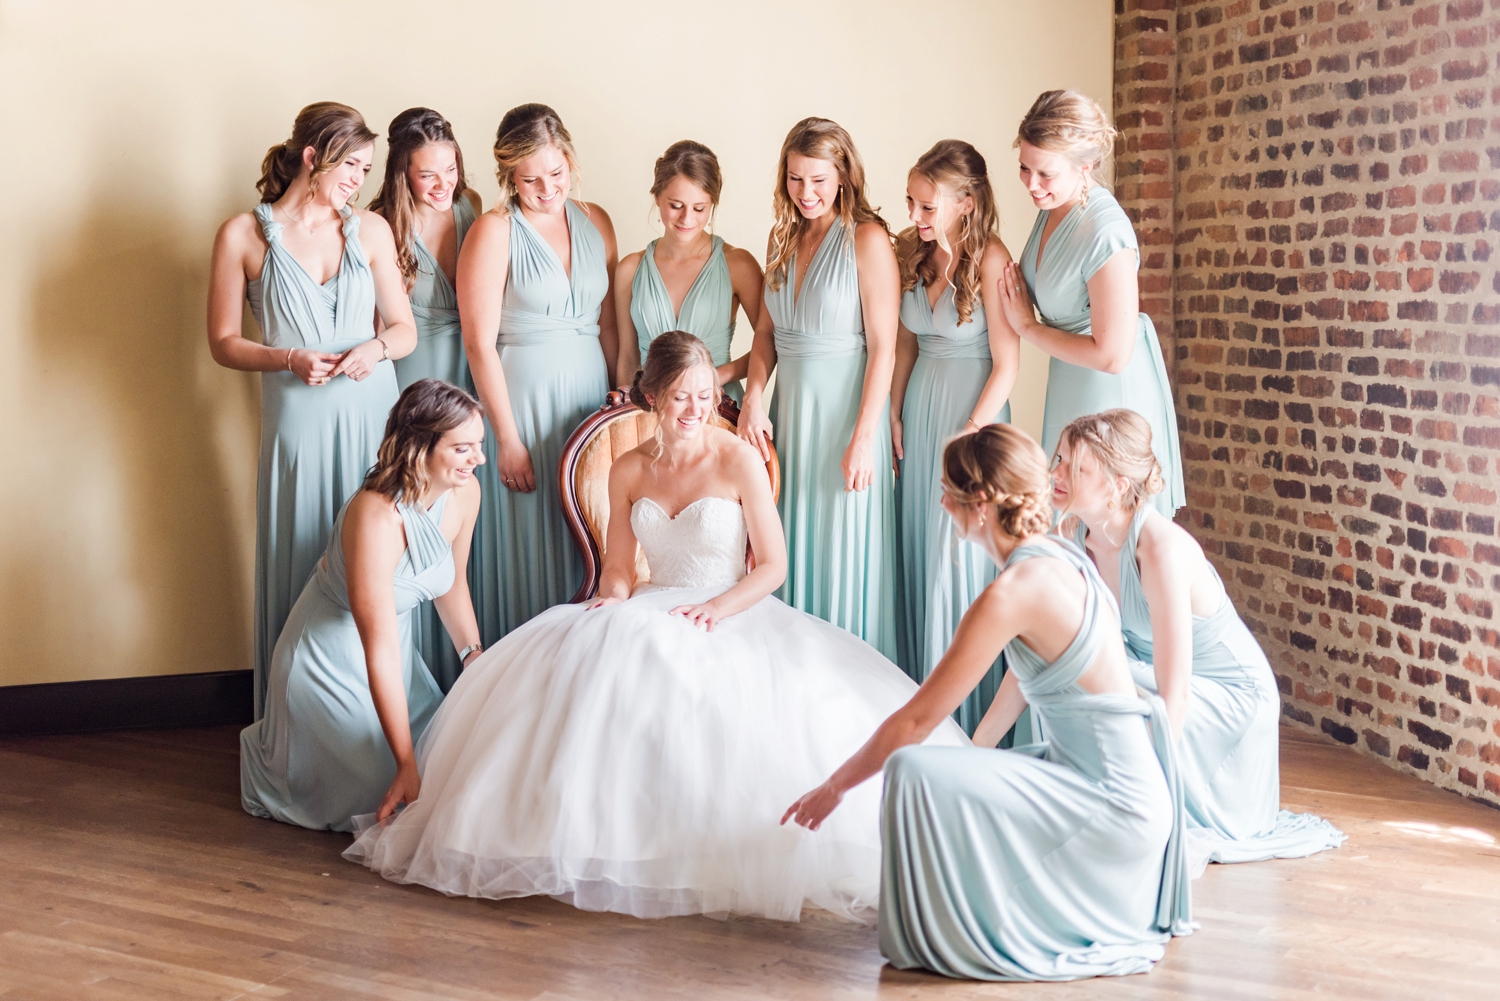 bridesmaids-helping-the-bride-fluff-her-dress-with-light-blue-dresses